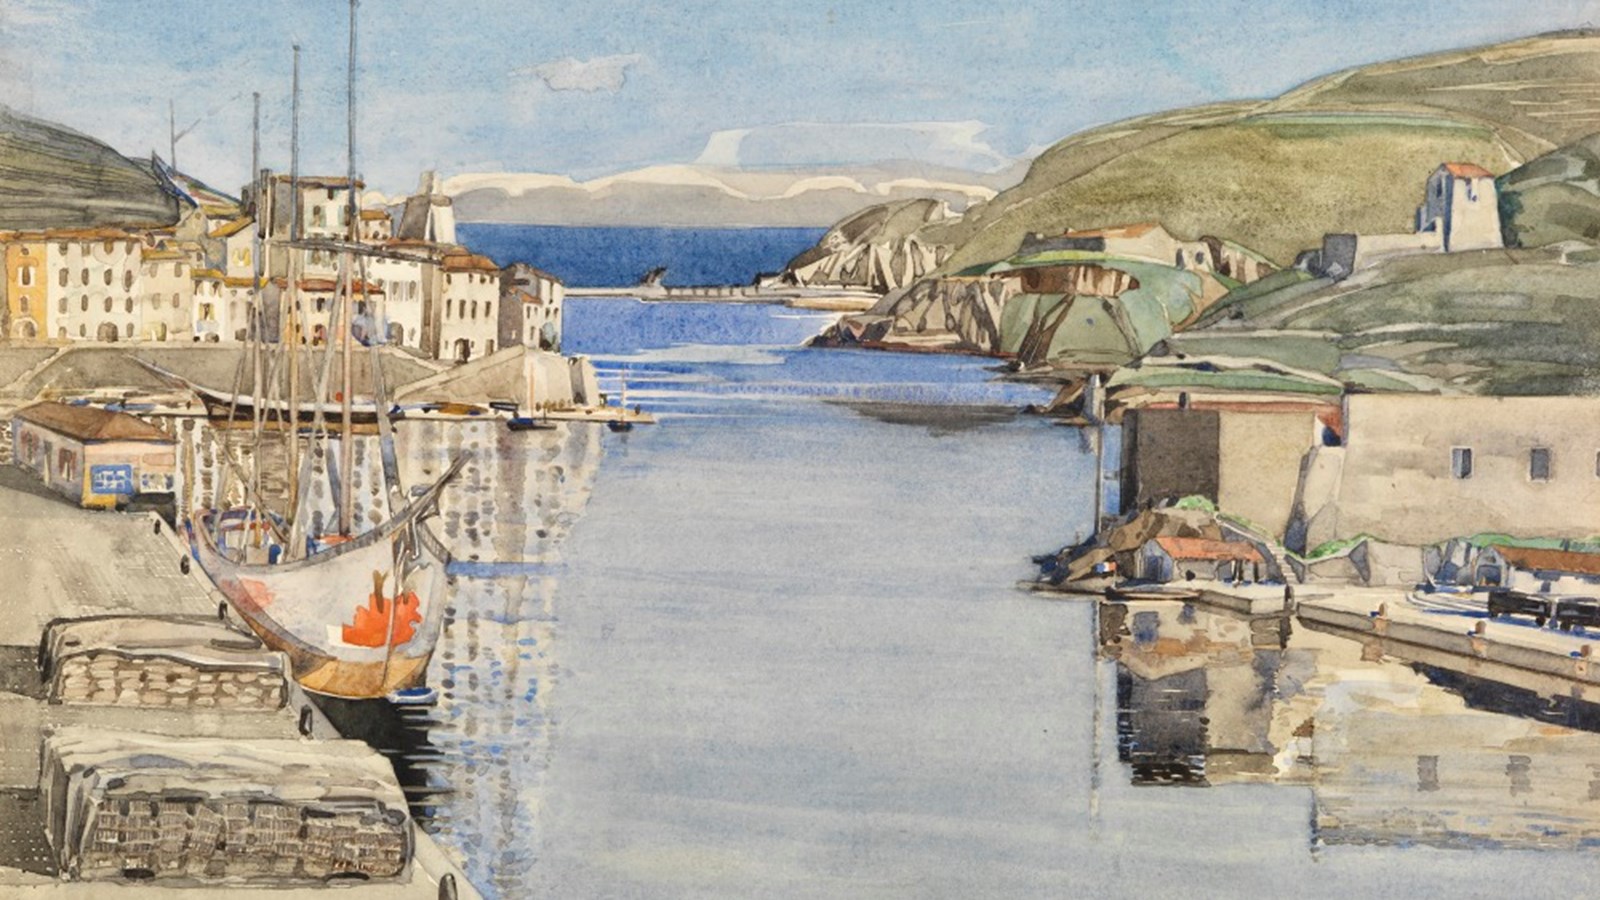 a painting of a Mediterranean harbour scene showing small masted ships along the quayside in a bay with a blue channel leading out to sea.